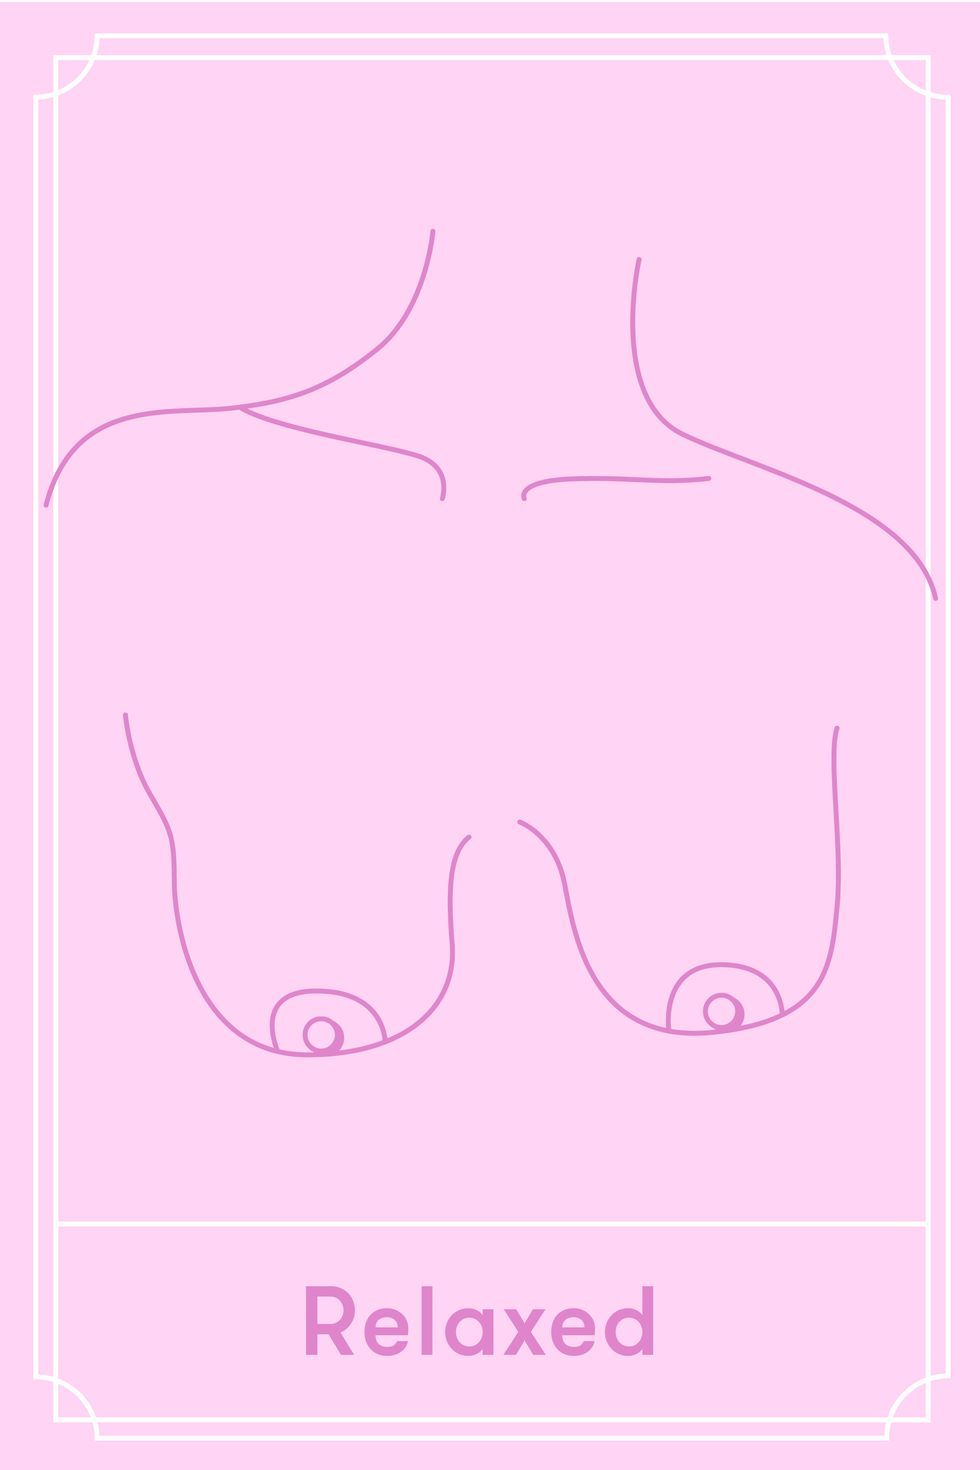 Relaxed types of breast shapes